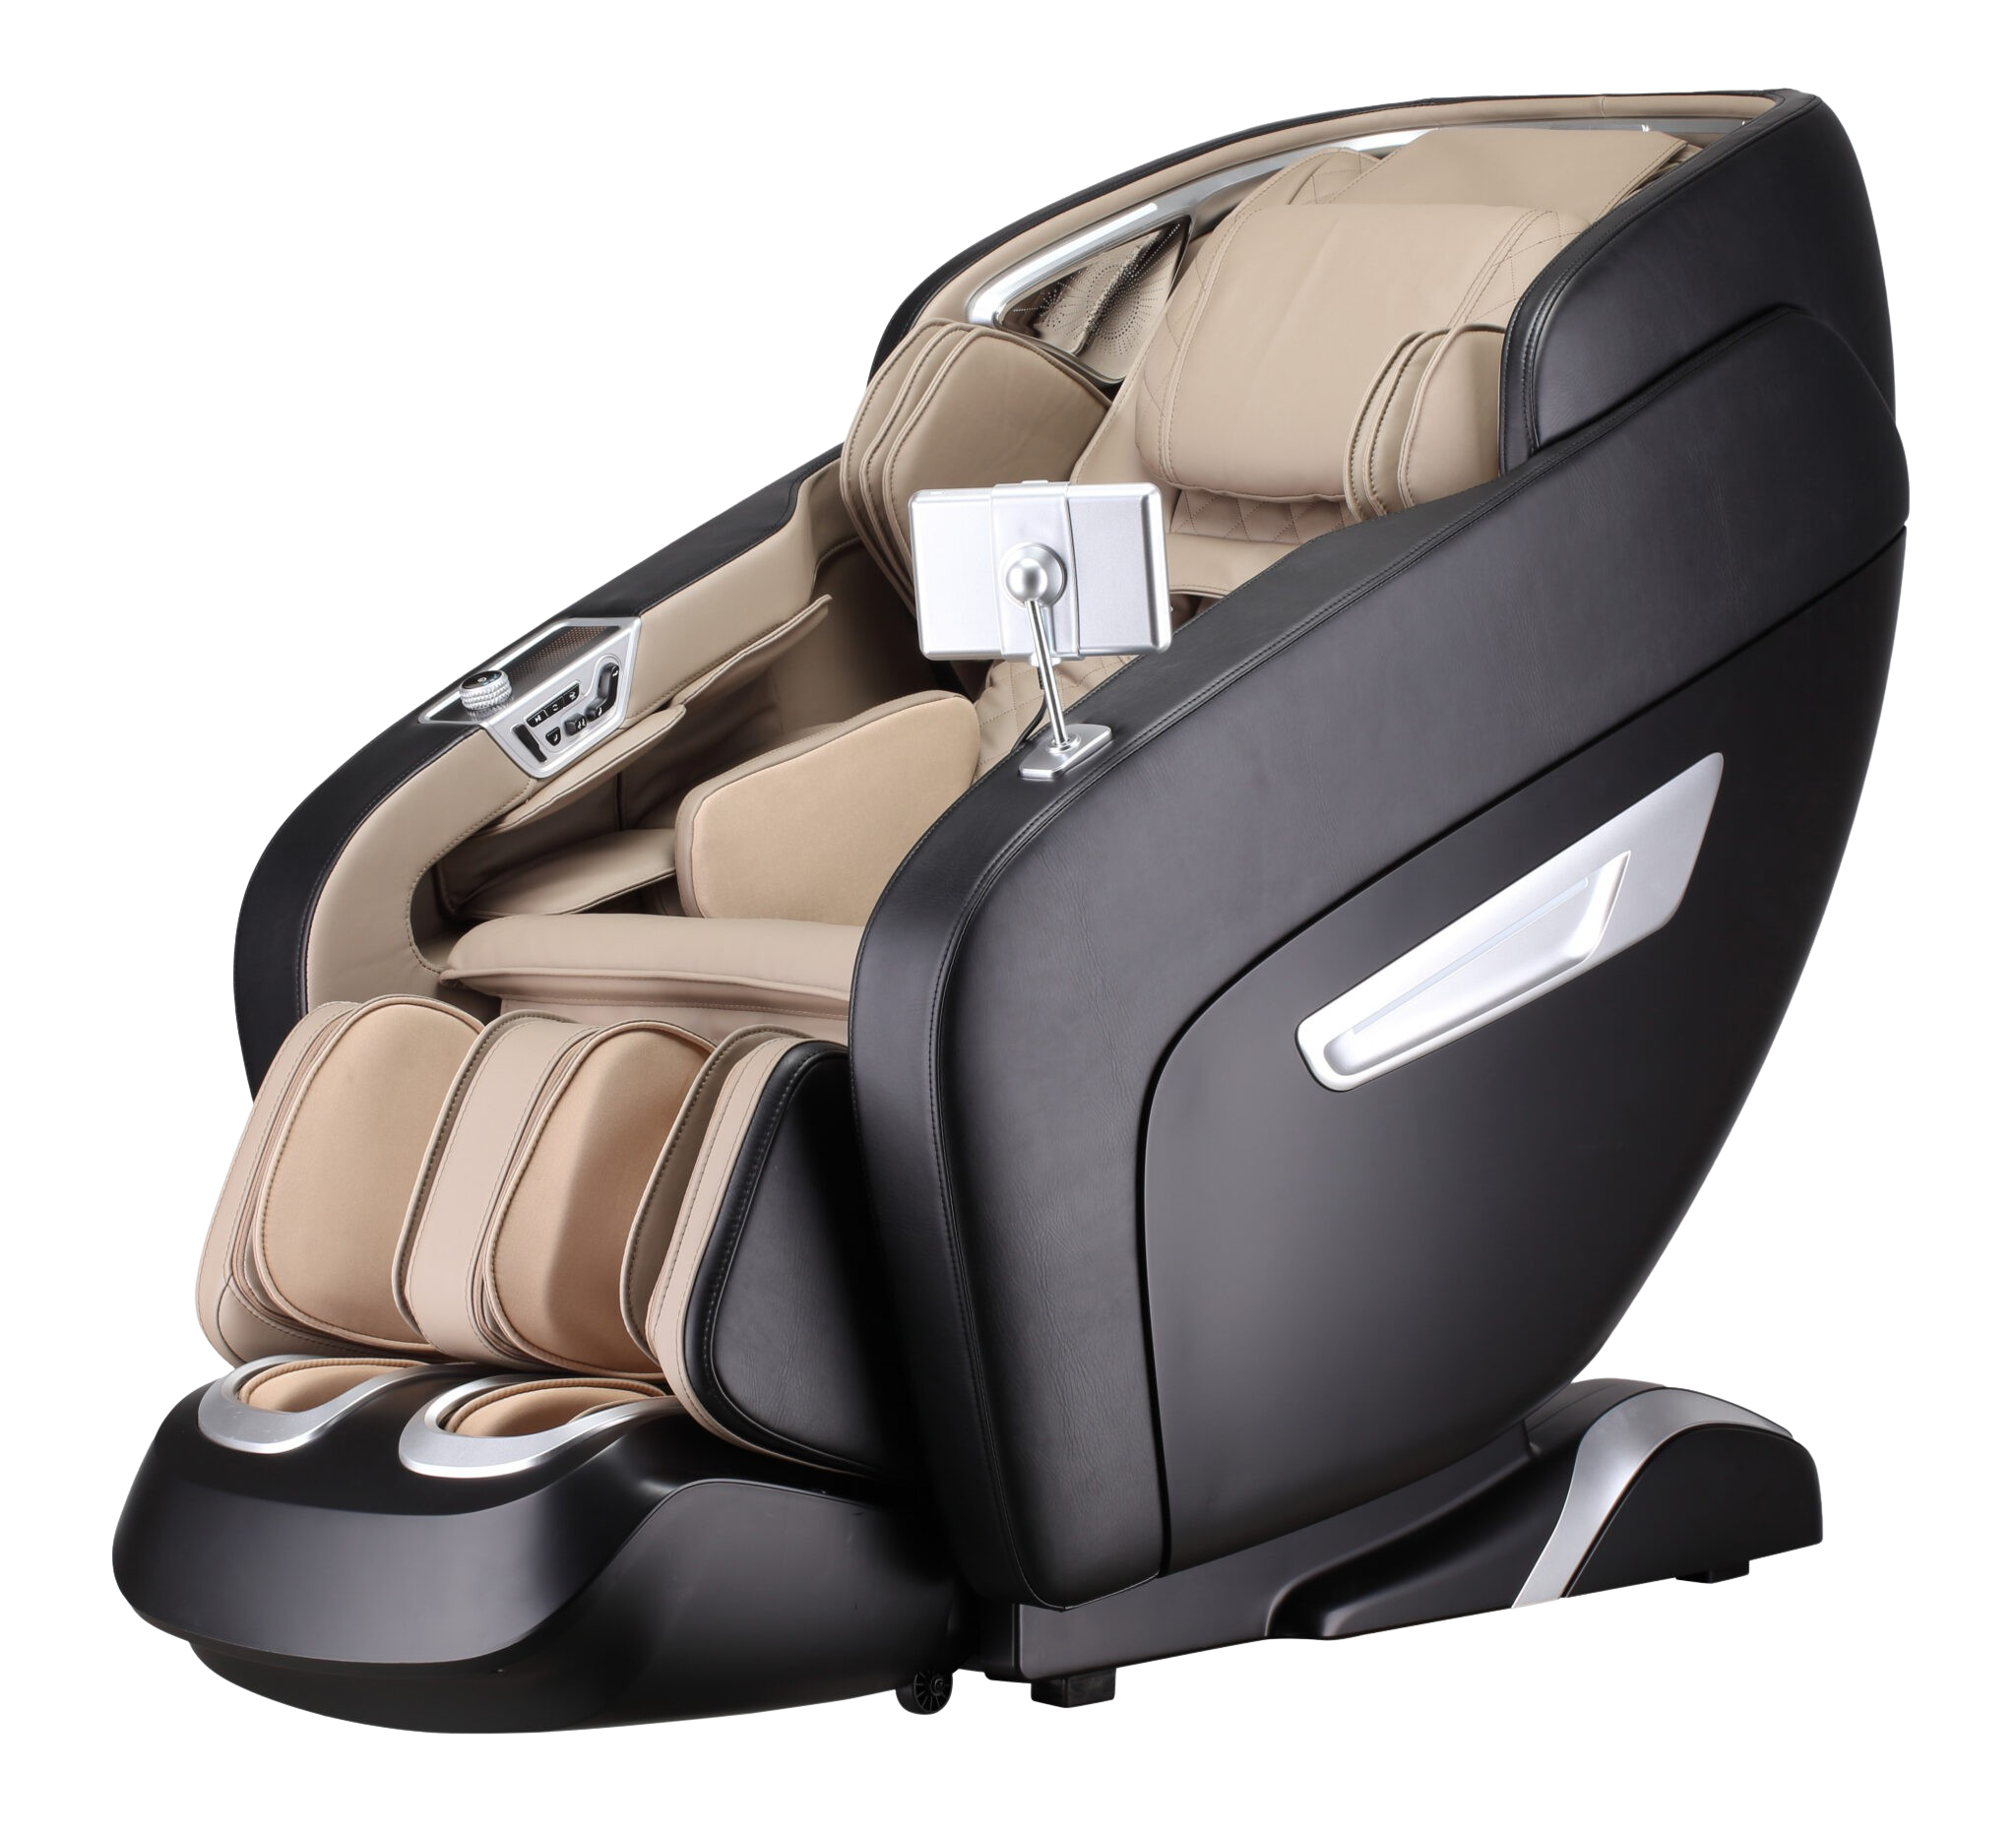 Lifesmart, Lifesmart 2-Toned 4D Ultimate Massage Chair with Bluetooth Speakers Black and Tan New